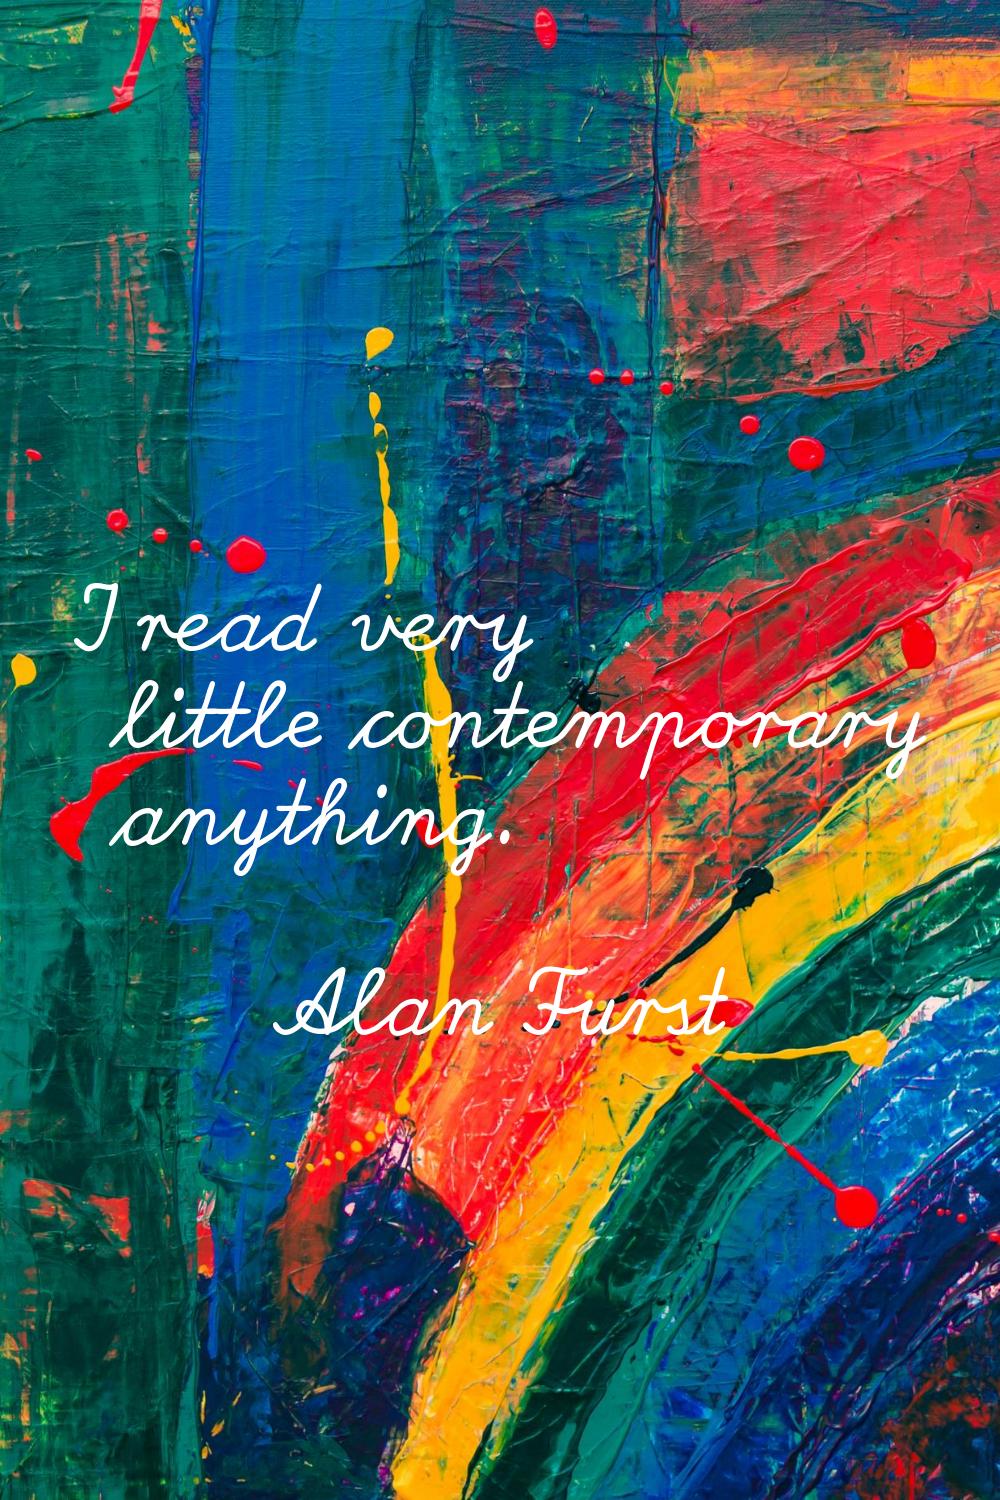 I read very little contemporary anything.